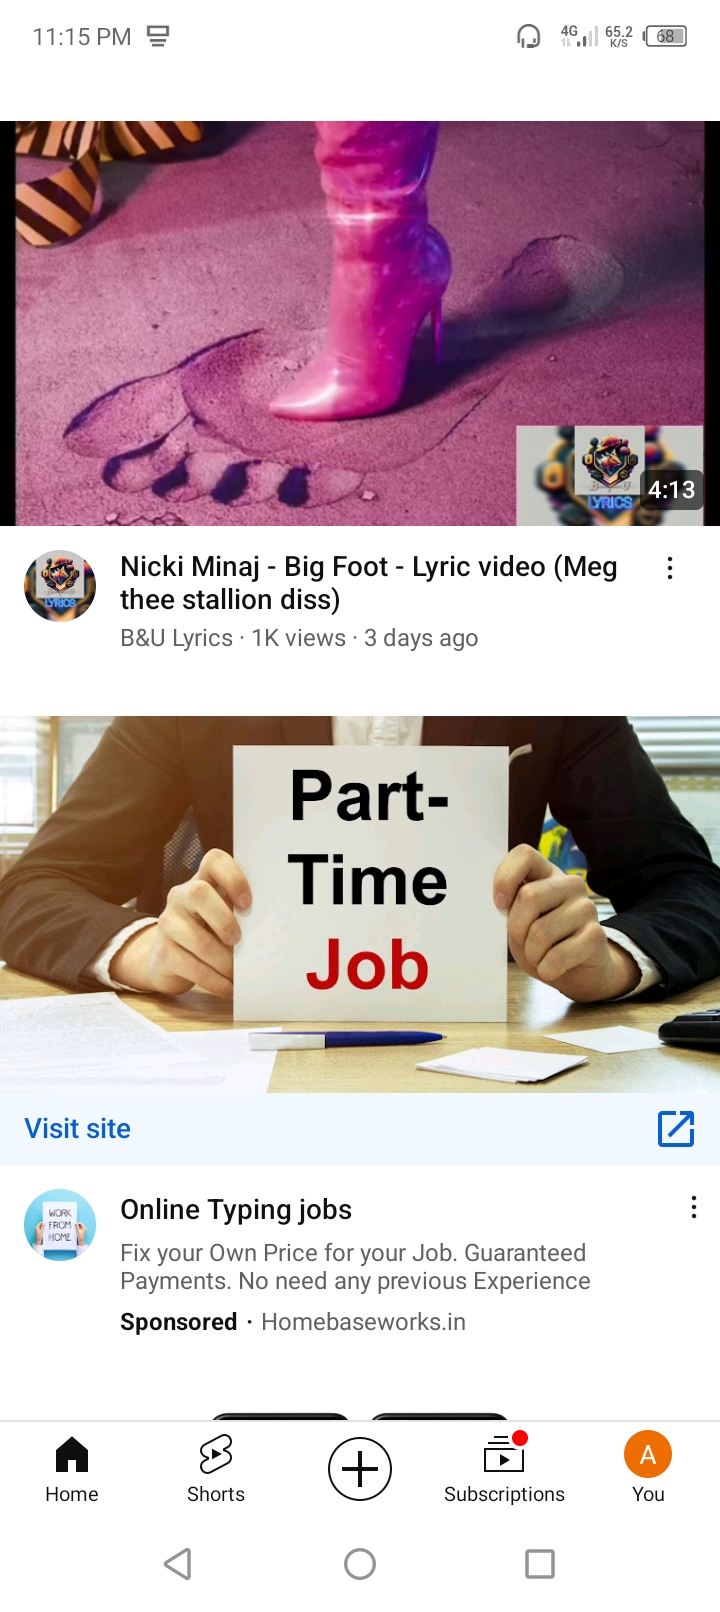 1115PM 0 C2 (am

 

 

Nicki Minaj - Big Foot - Lyric video (Meg
&) thee stallion diss)

B&U Lyrics - 1K views - 3 days ago

   
 

 
  

Part-
Time

Job
Visit site A

Online Typing jobs

we» Fix your Own Price for your Job. Guaranteed
Payments. No need any previous Experience

Sponsored - Homebaseworks.in

A 8 pH & 0

Home Shorts Subscriptions You

d Oo